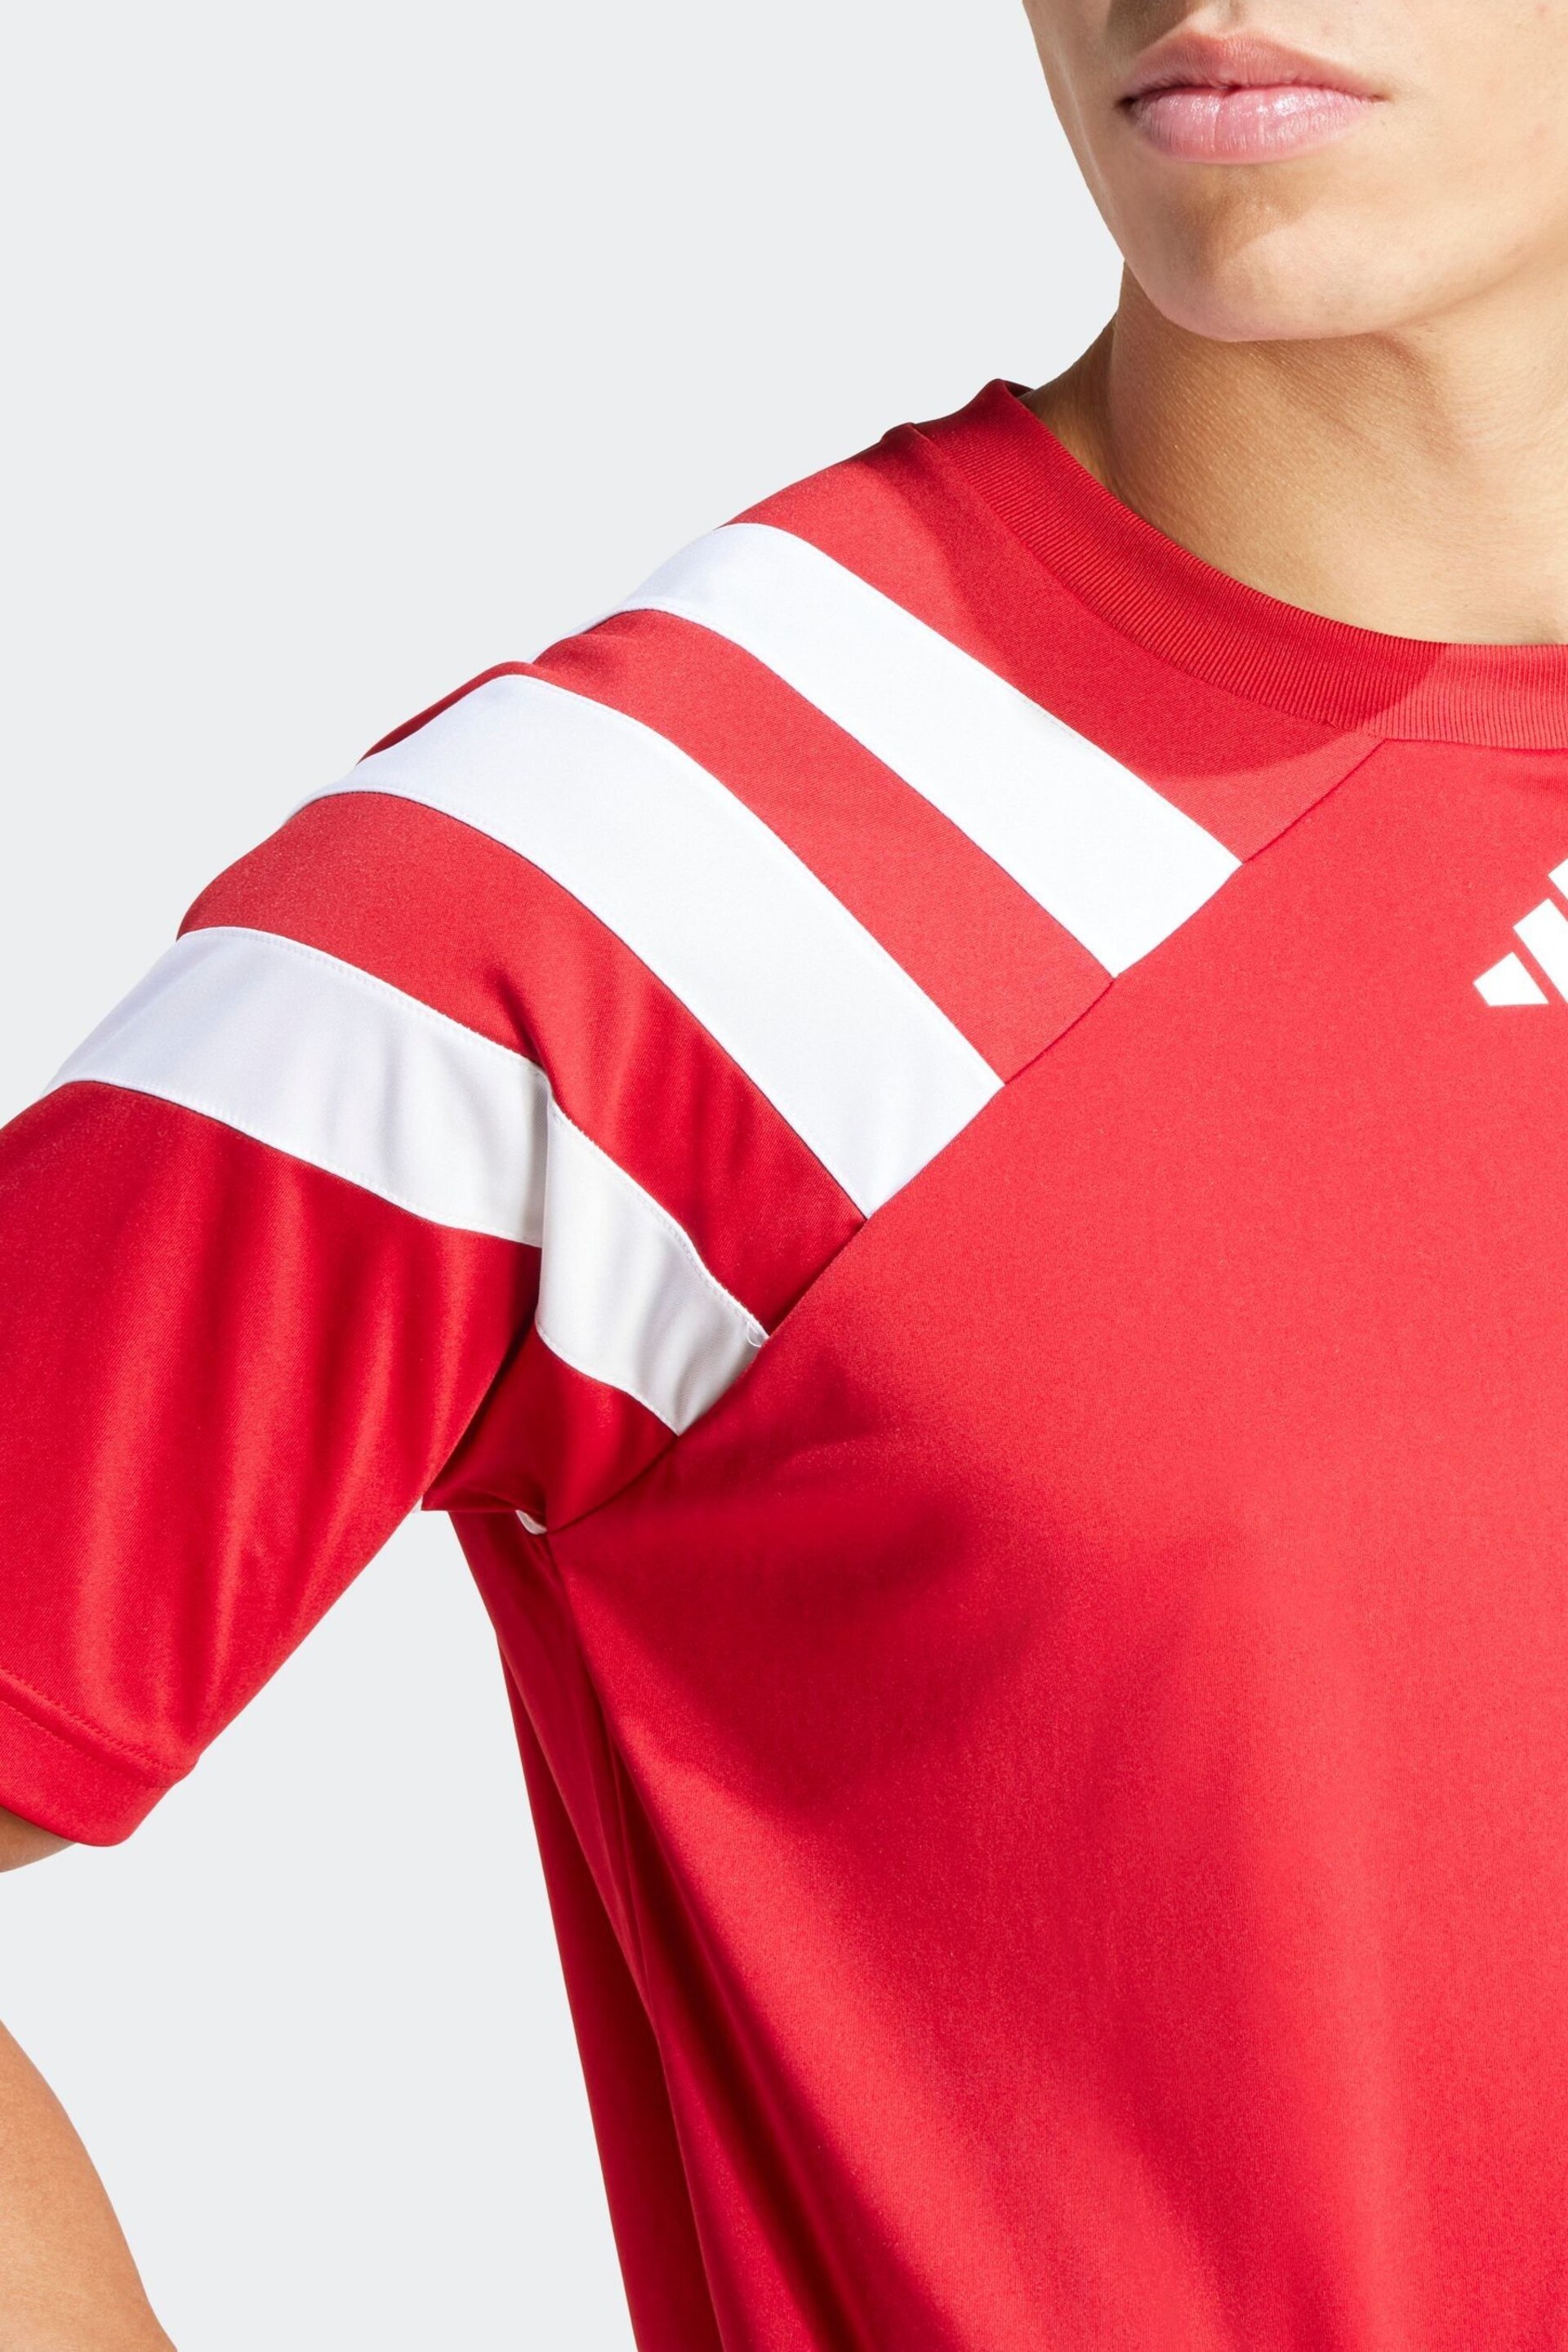 adidas Red Fortore 23 Jersey - Image 4 of 7